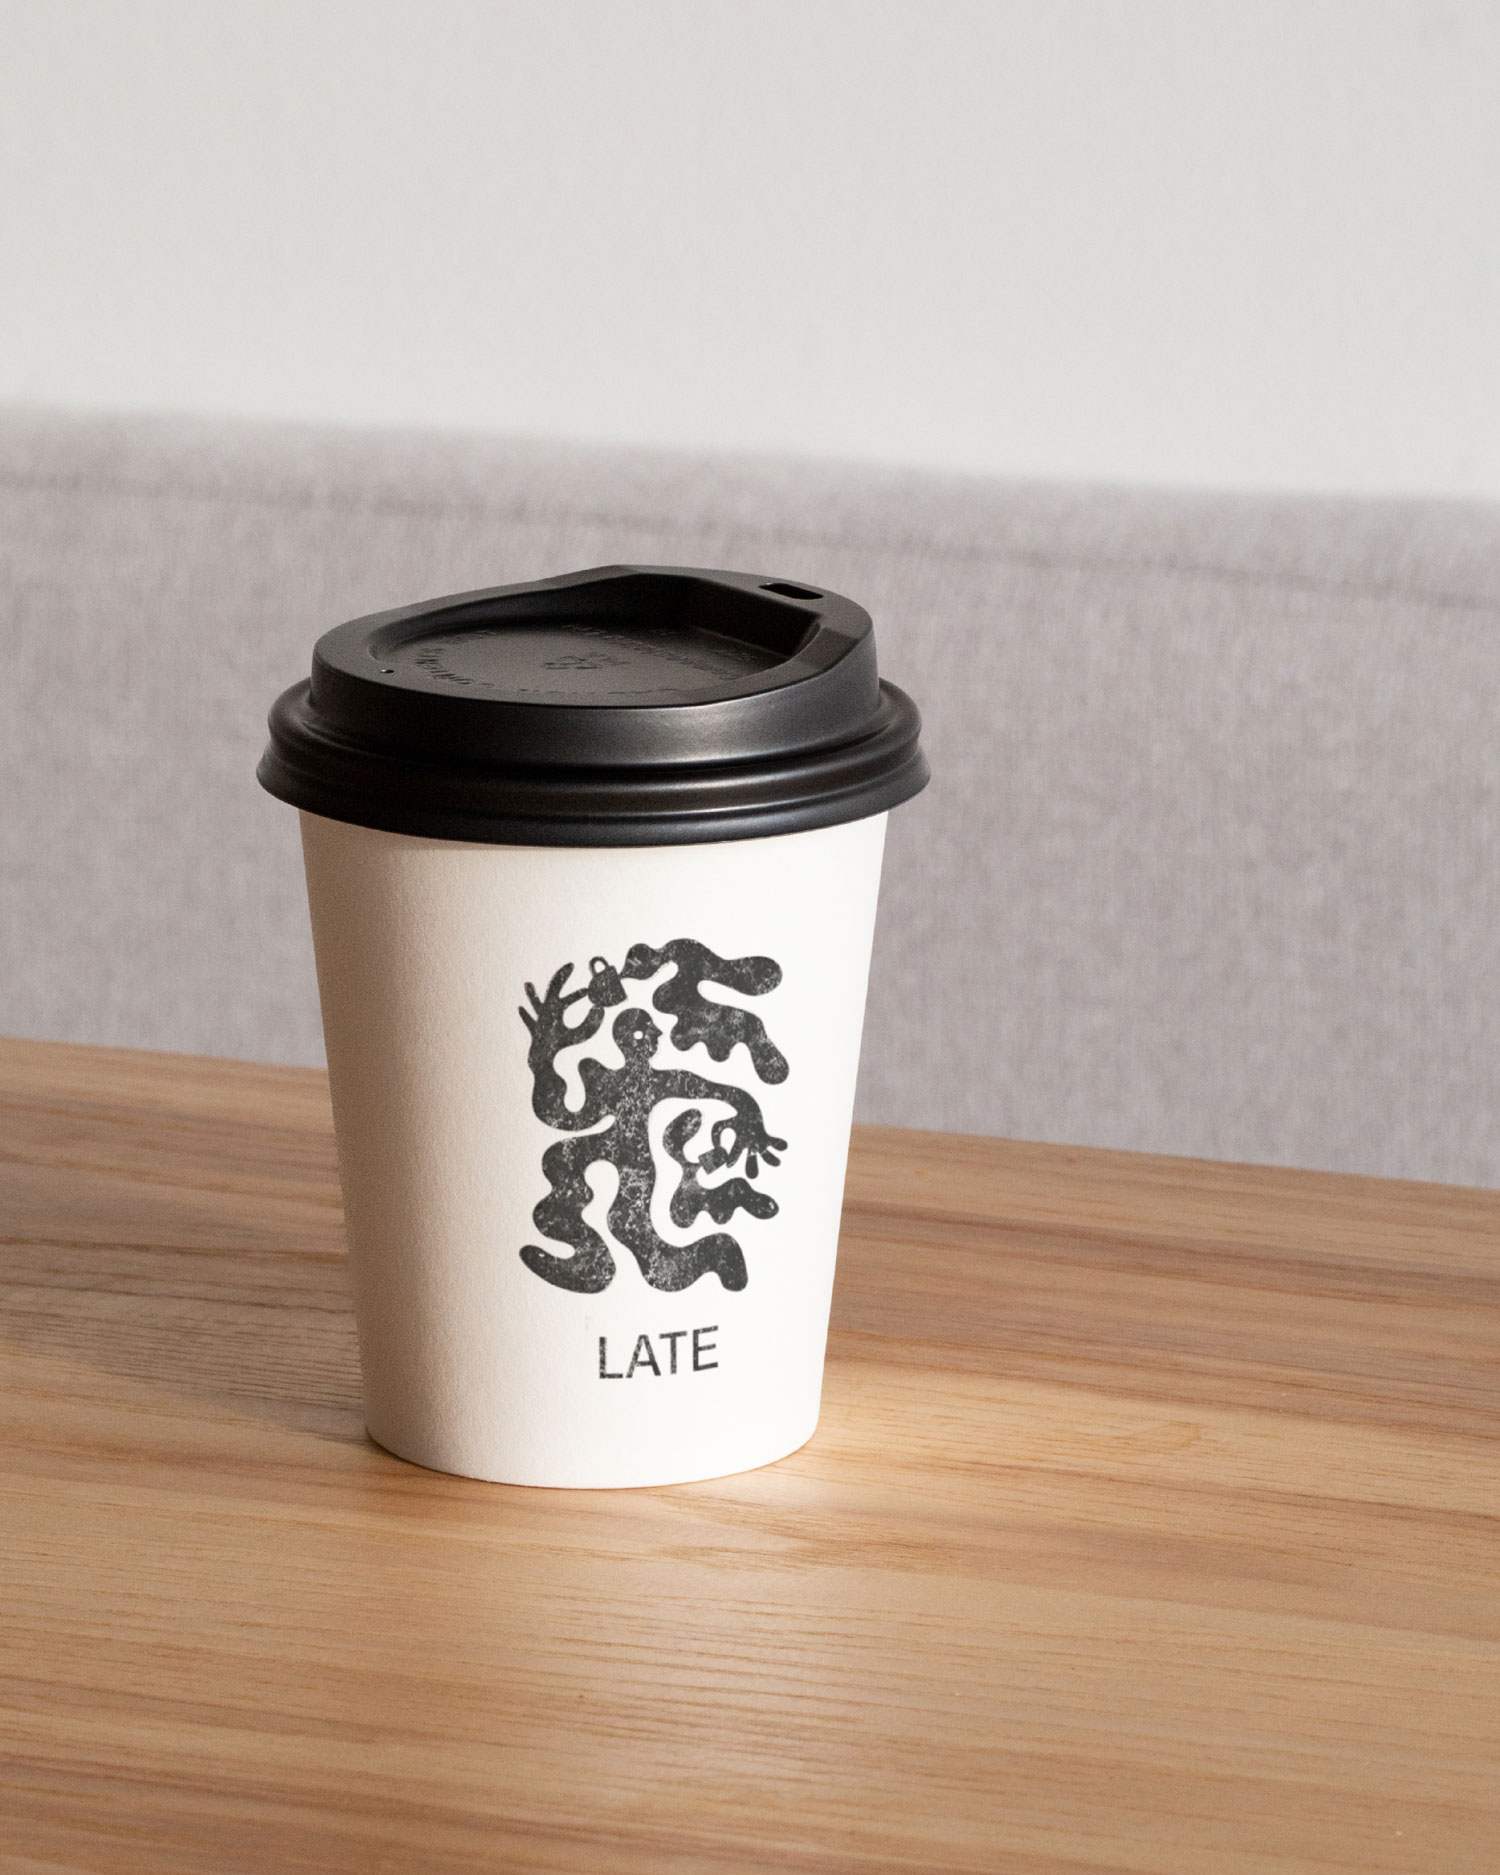 LATE Cafe Brand Identity by Angel and Anchor